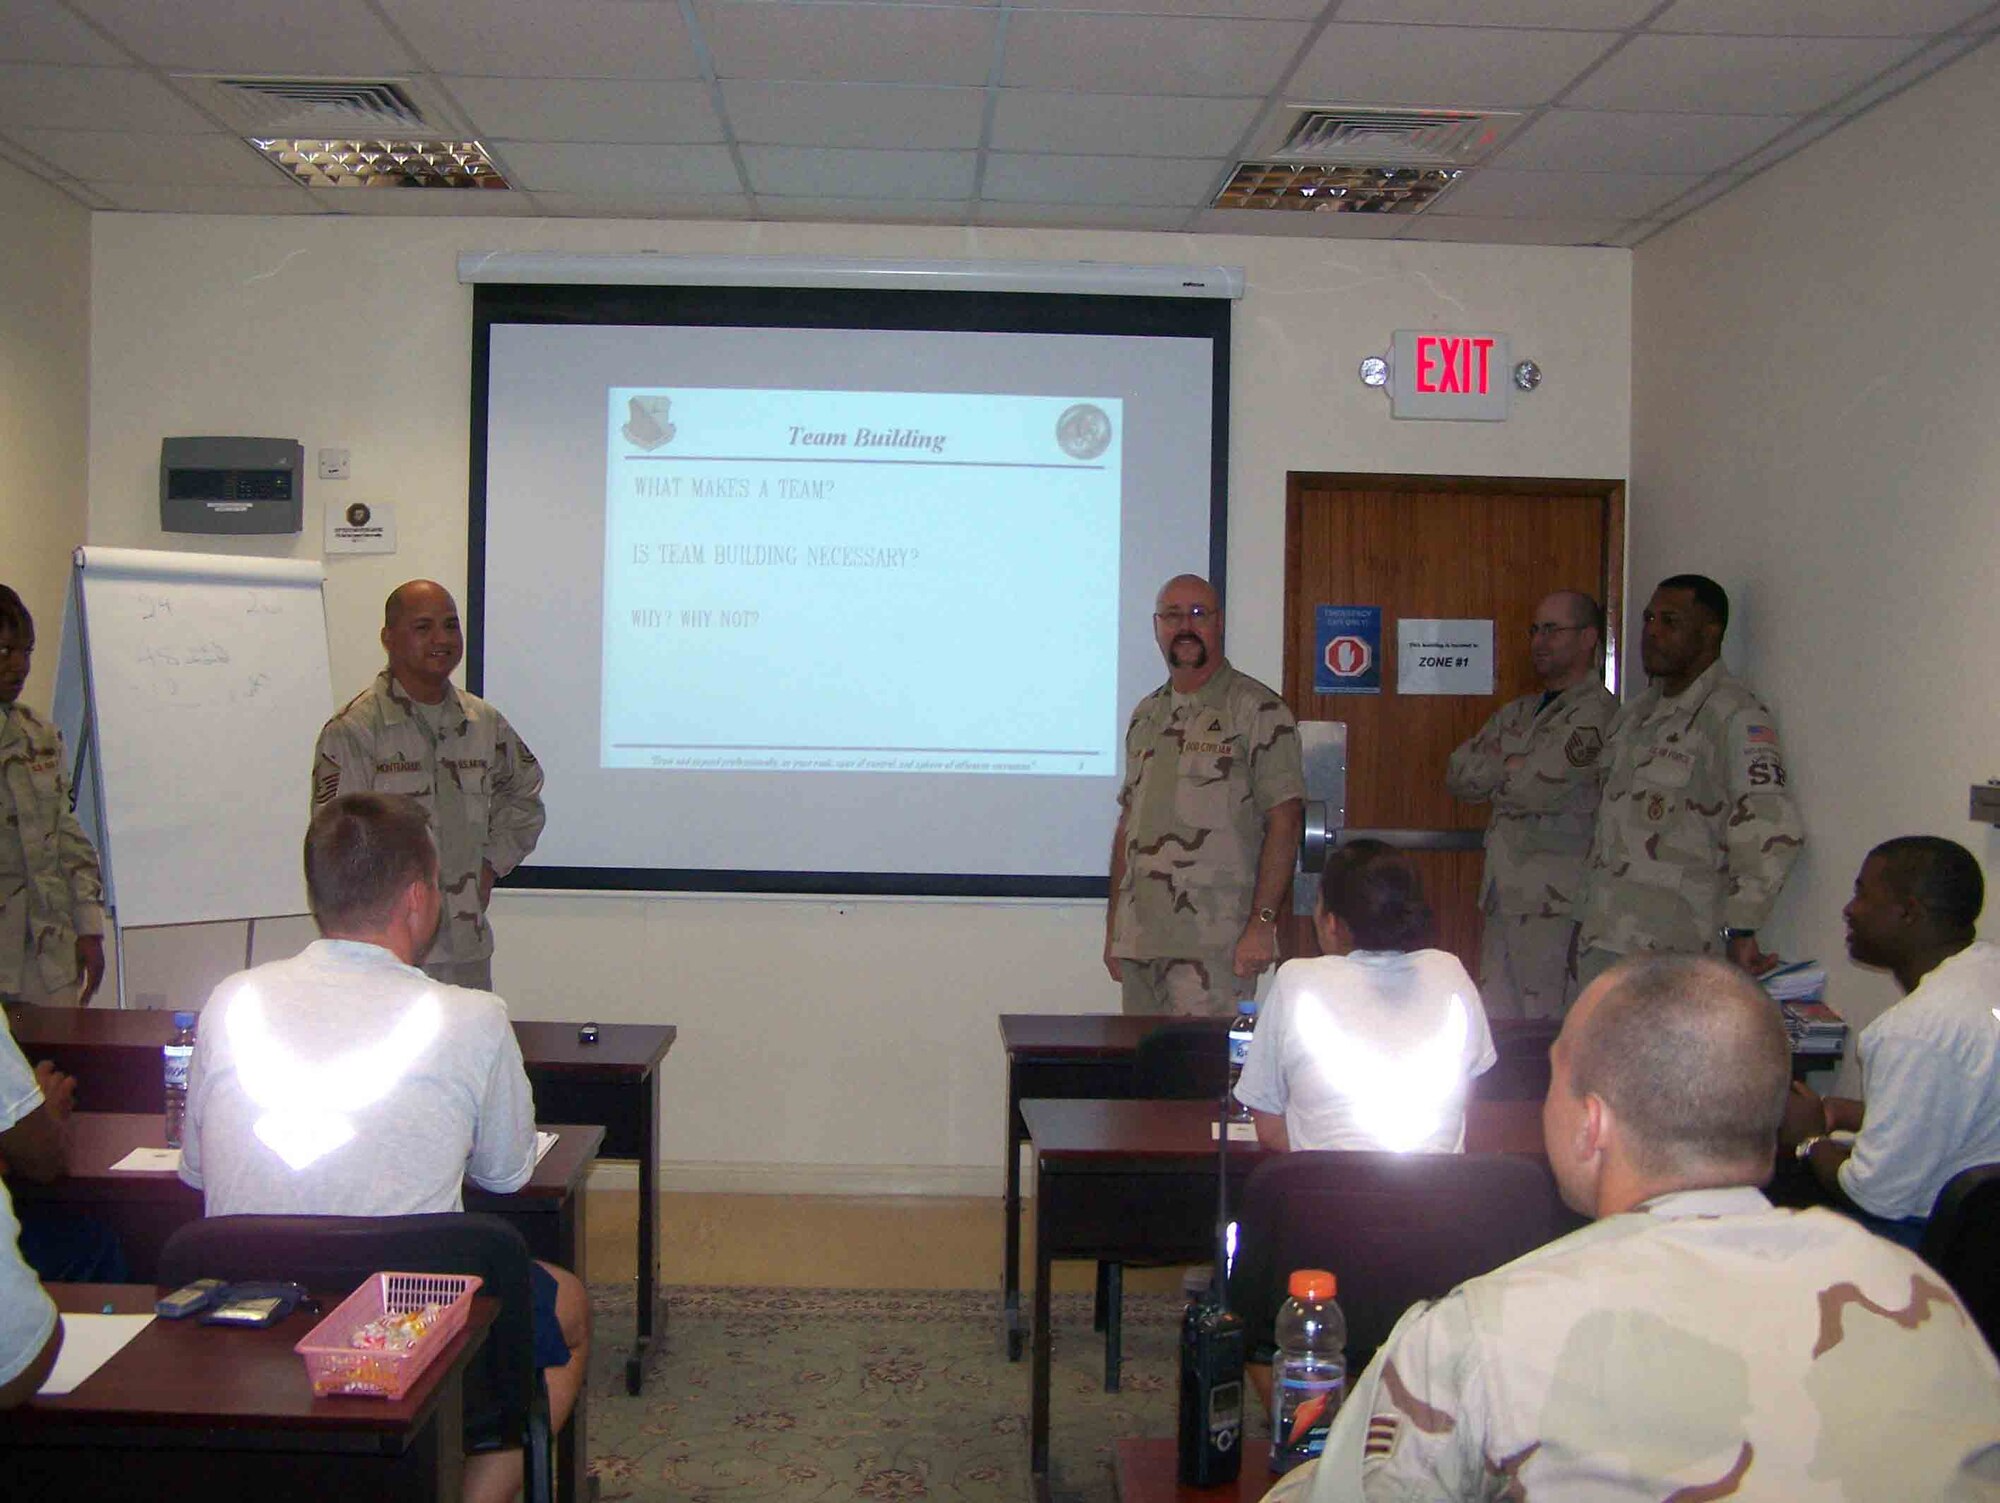 SOUTHWEST ASIA--379th Expeditionary Force Support Squadron Airman Readiness Center instructors, Master Sgt. Meril Monteagudo, left, and Barry Wilkinson give a team building brief to more than 10 servicemembers at the ARC classroom May 16. The ARC is one of its kind in the Air Forces Central area of responsibility.  It provides deployed servicemembers valuable resources to help with reintegration, financial management, leadership and other classes designed to help cope with deployments. (Courtesy photo)
